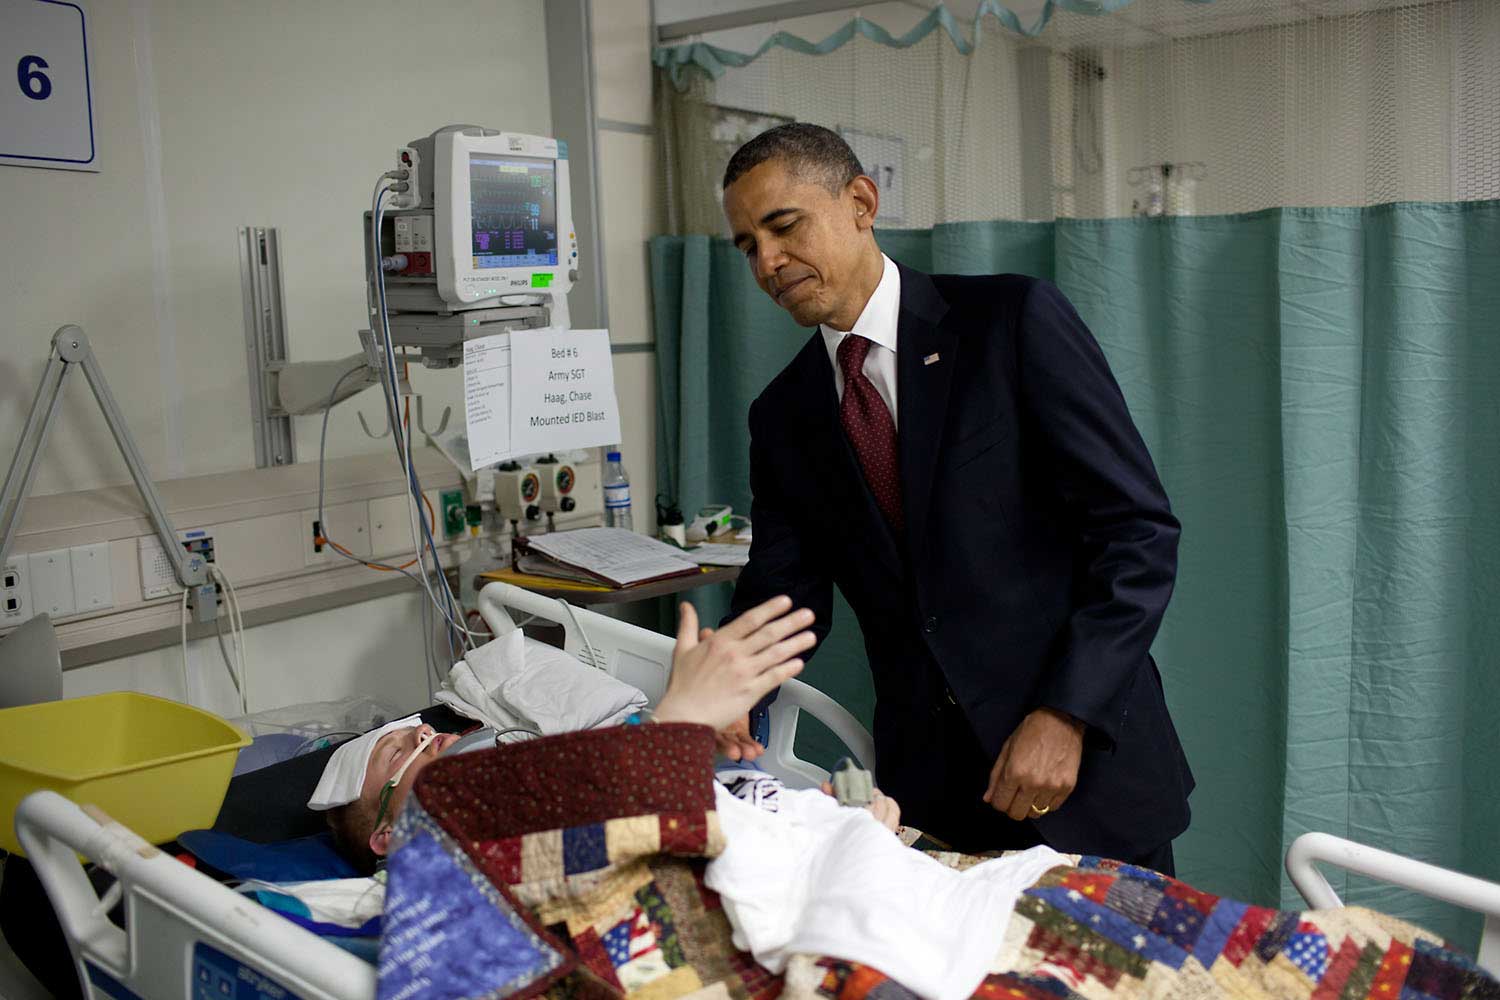 "This was one of the most poignant moments of the President's first term. He was visiting wounded warriors in the intensive care unit ICU at Bagram Air Field, Afghanistan, May 1, 2012. He had just presented a Purple Heart to Sgt. Chase Haag, who had been injured by an IED just hours before. Sgt. Haag was covered with a blanket and it was difficult to see how badly he was injured. He was also seemingly unconscious so the President whispered in his ear so not to wake him. Just then, there was a rustling under the blanket and Sgt. Haag, eyes still closed, reached his hand out to shake hands with the President."